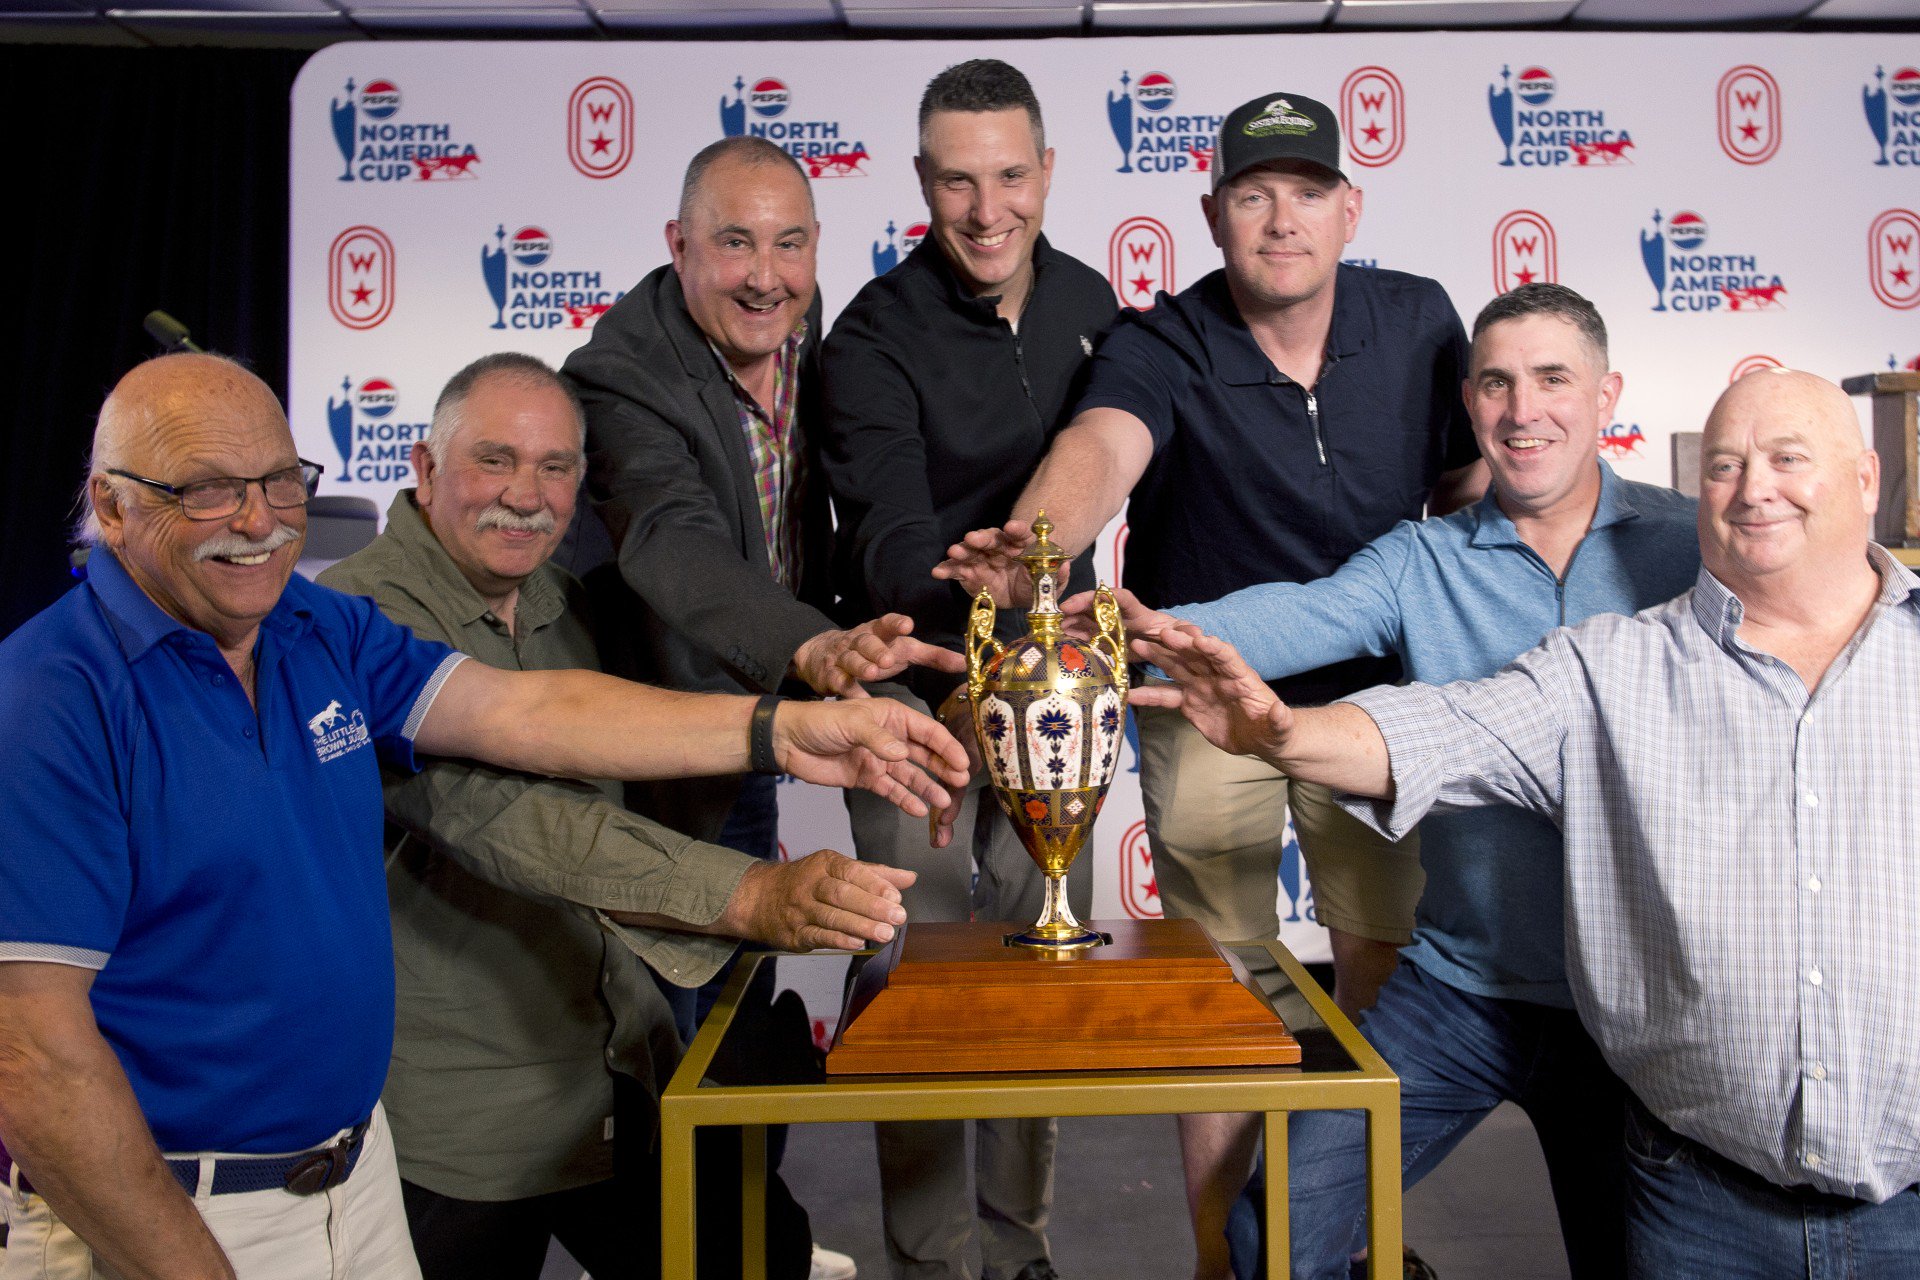 Posts drawn for strong 41st Pepsi North America Cup